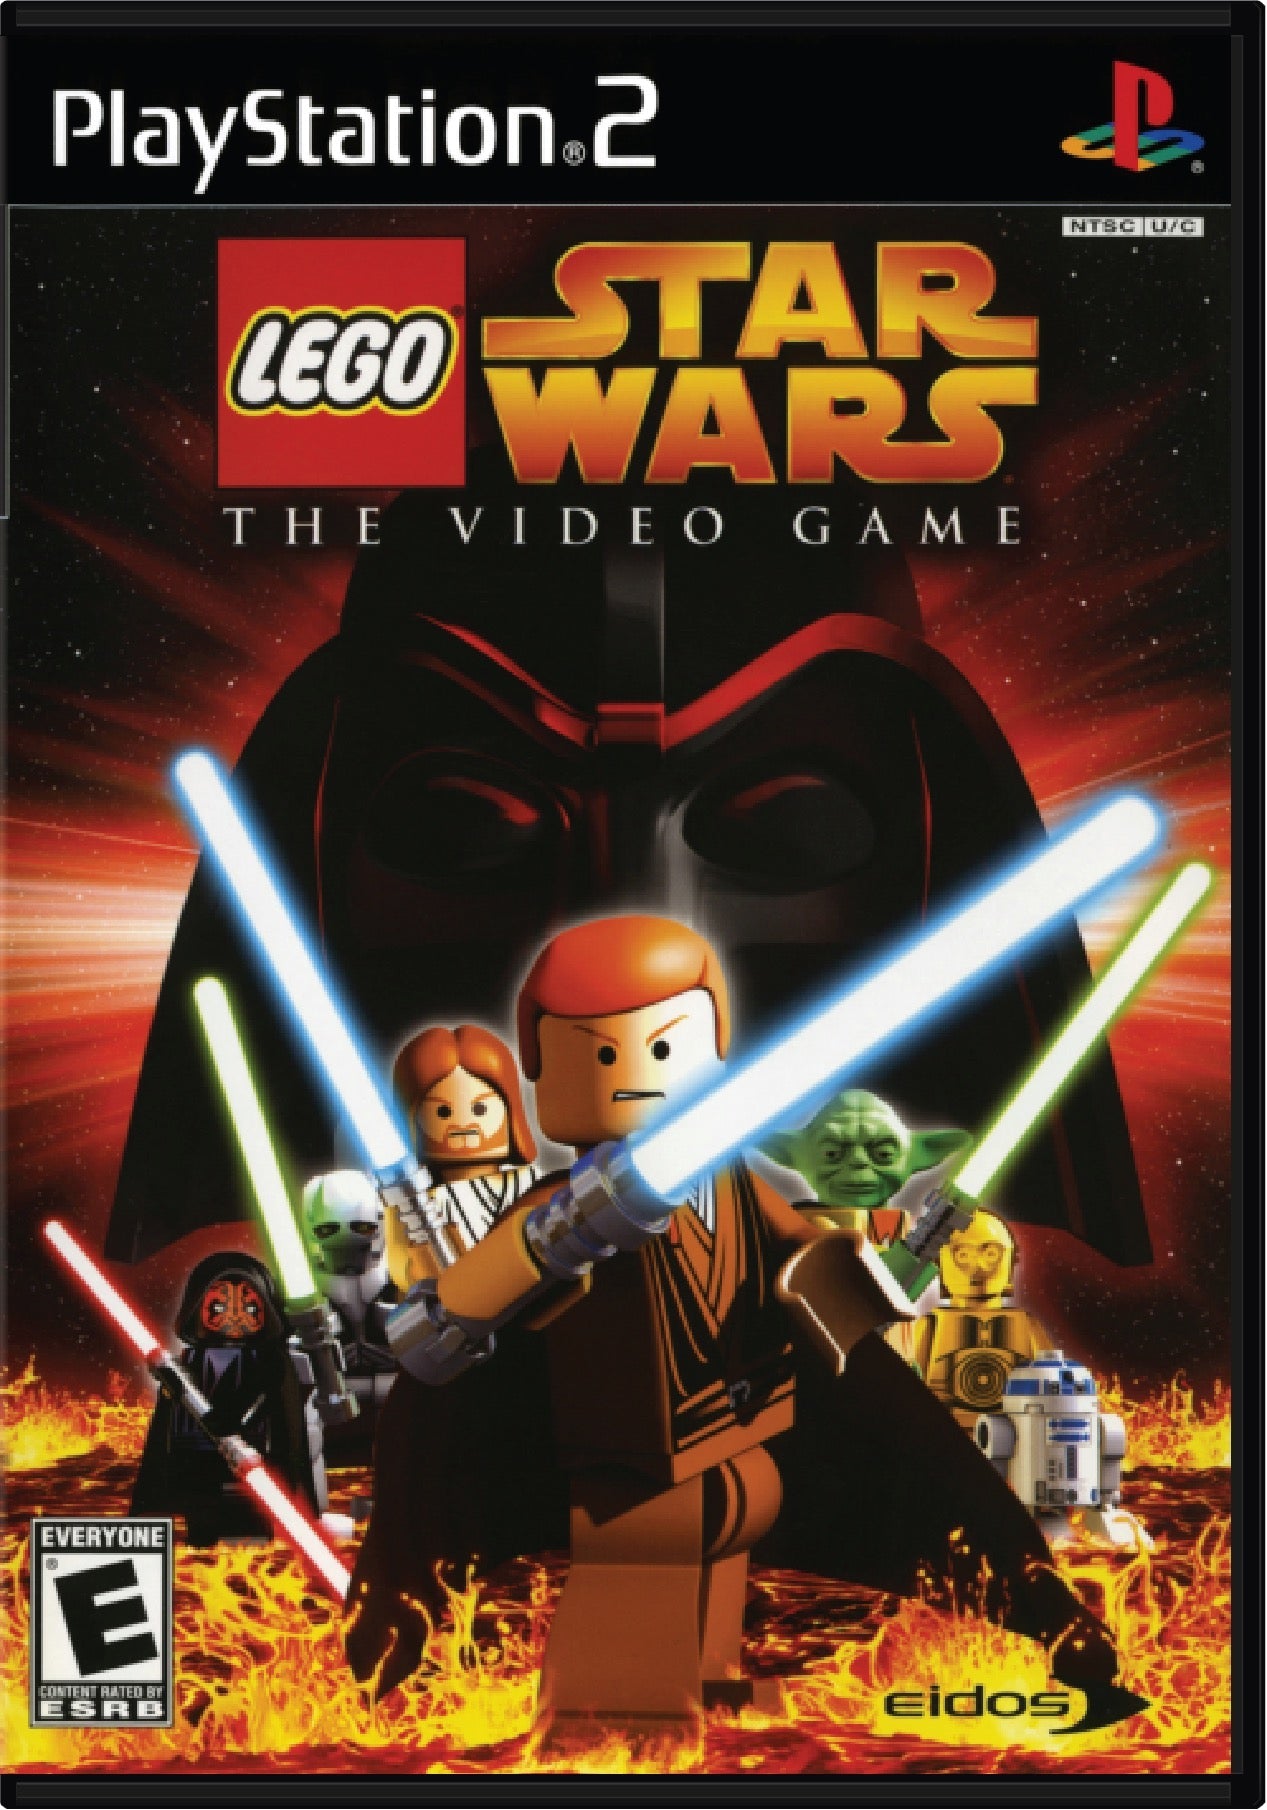 LEGO Star Wars The Video Game Cover Art and Product Photo